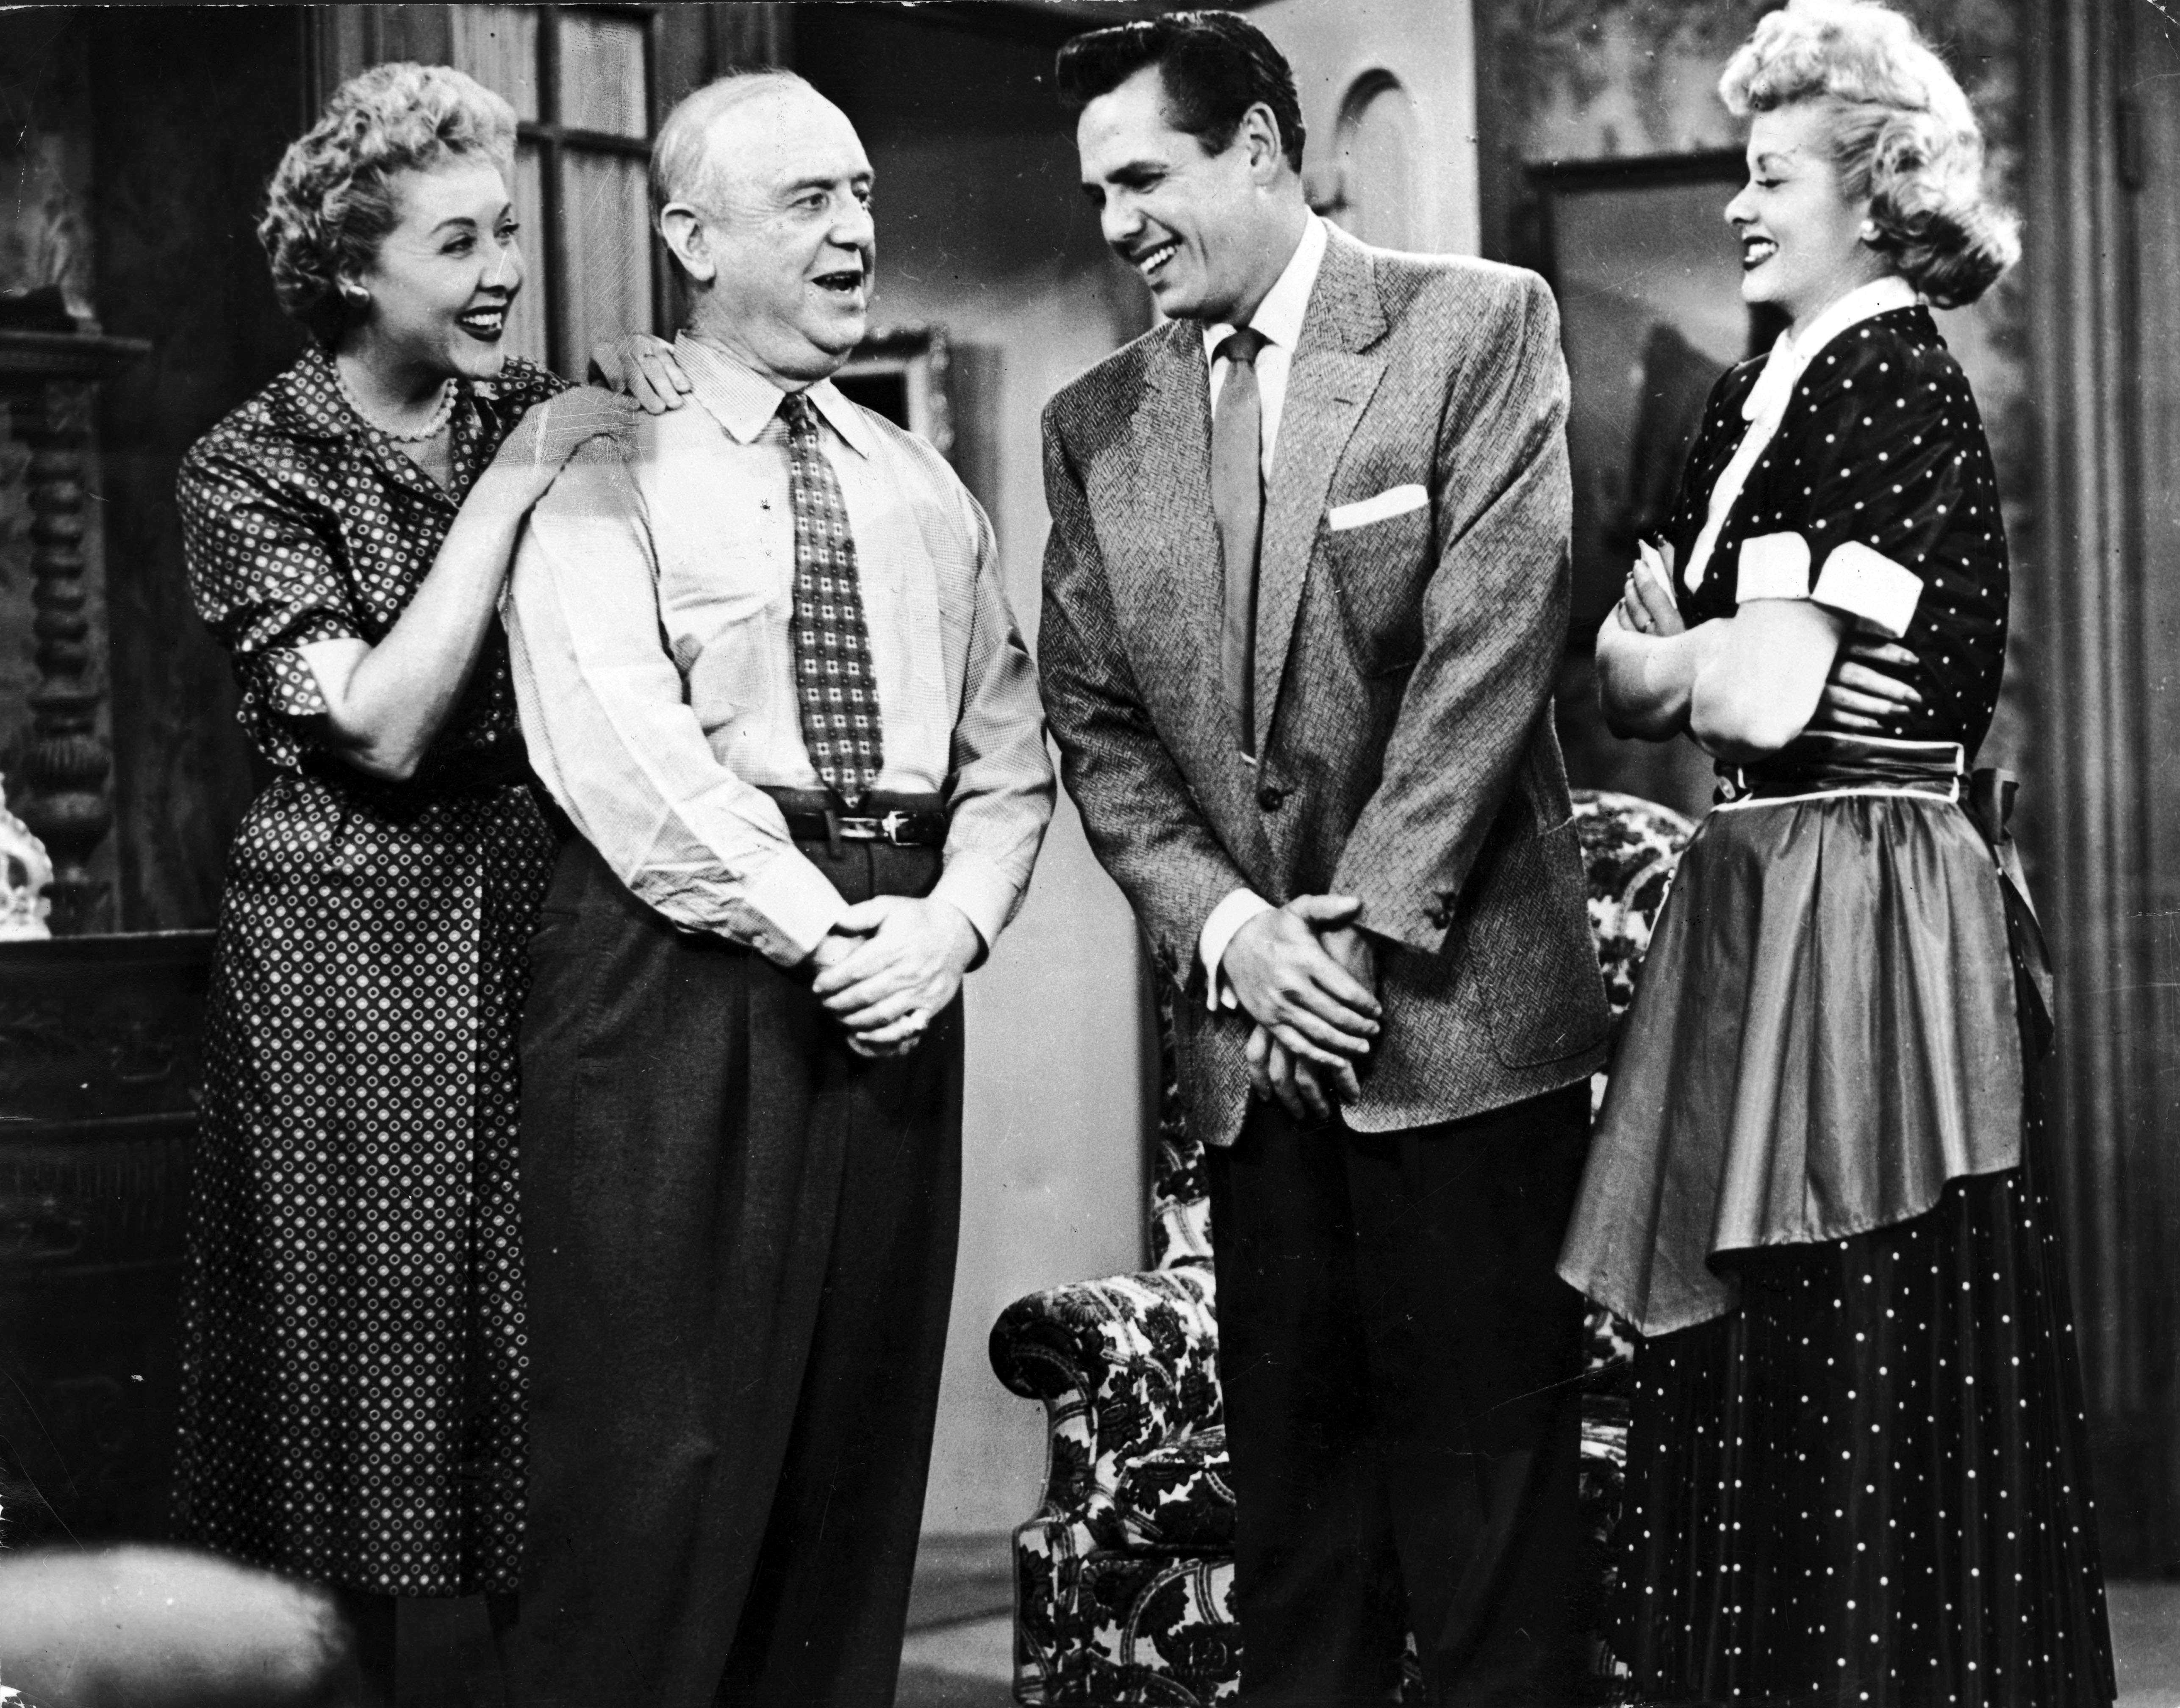 Vivian Vance, William Frawley, Desi Arnaz, and Lucille Ball on the popular television series 'I Love Lucy', circa 1955